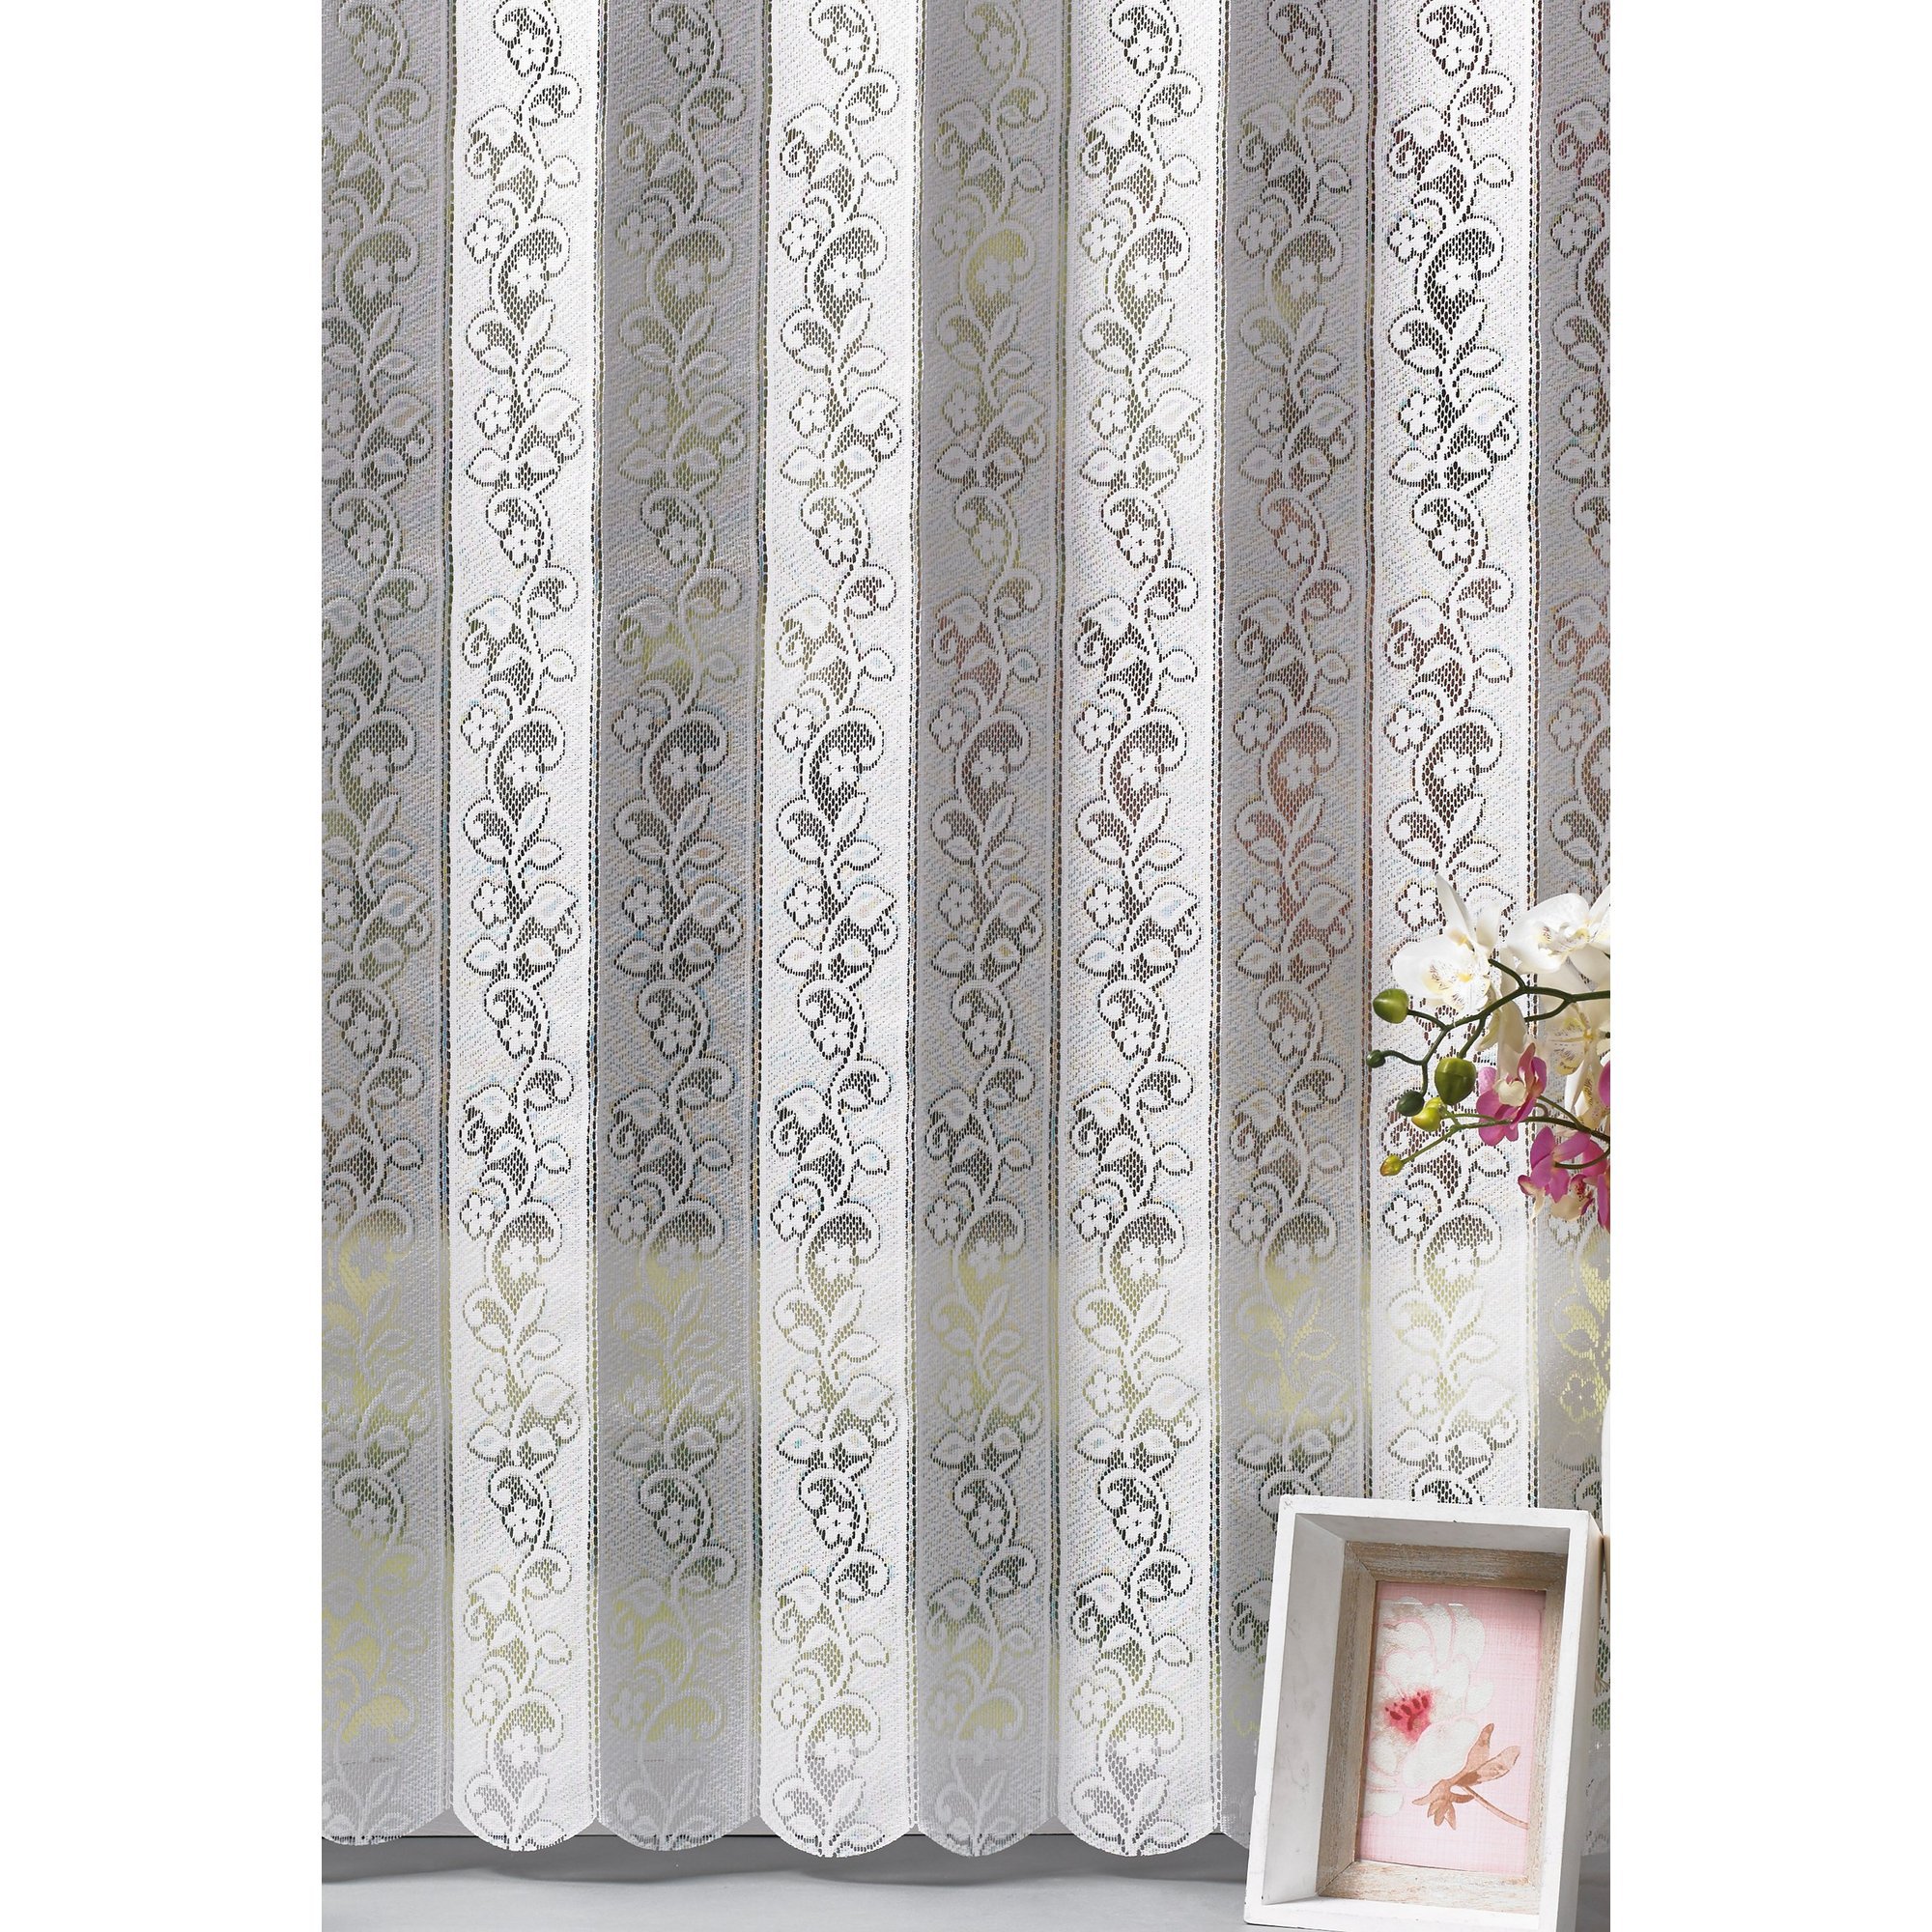 Daisy Easy Fit Louvre Style Blind